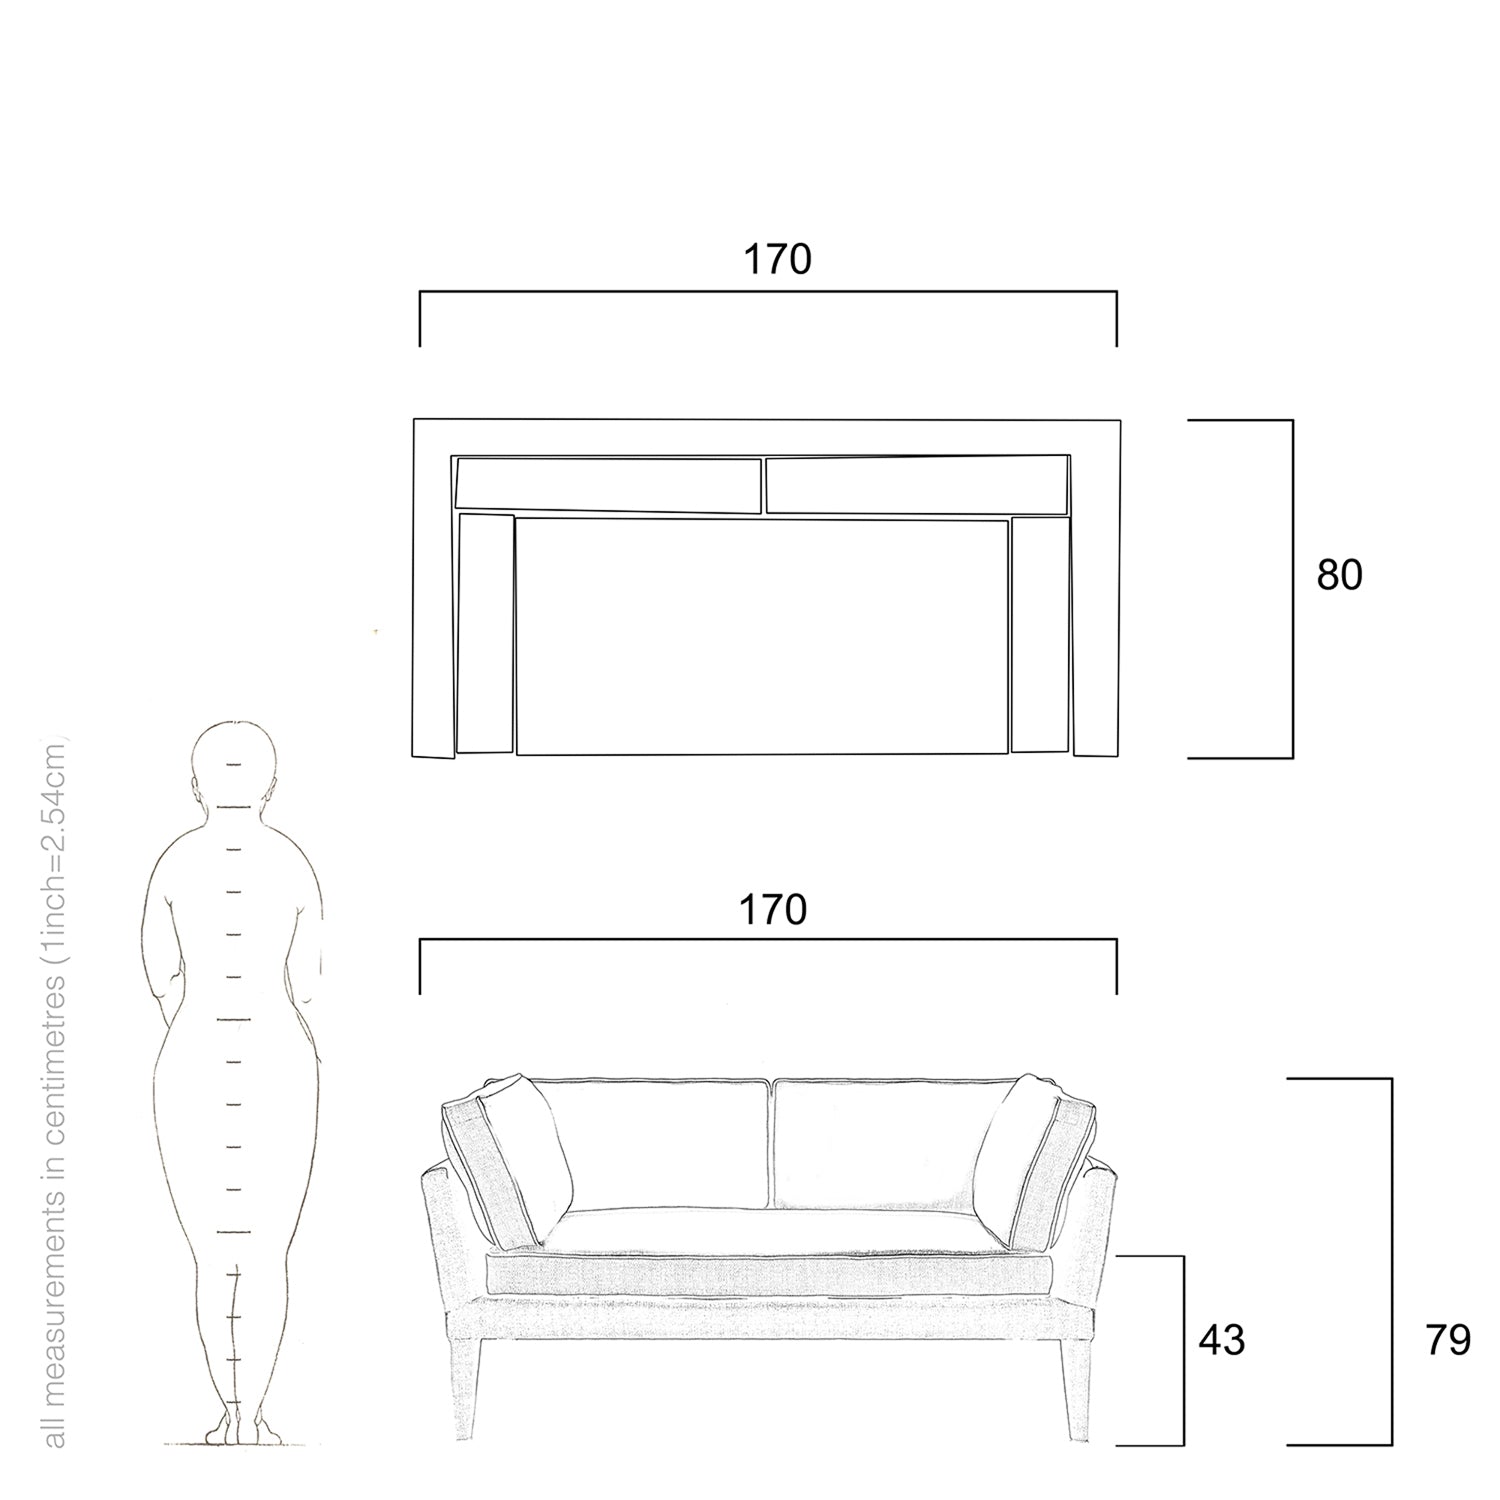 Stellina Loveseat Technical Drawing - Dimensions and Details